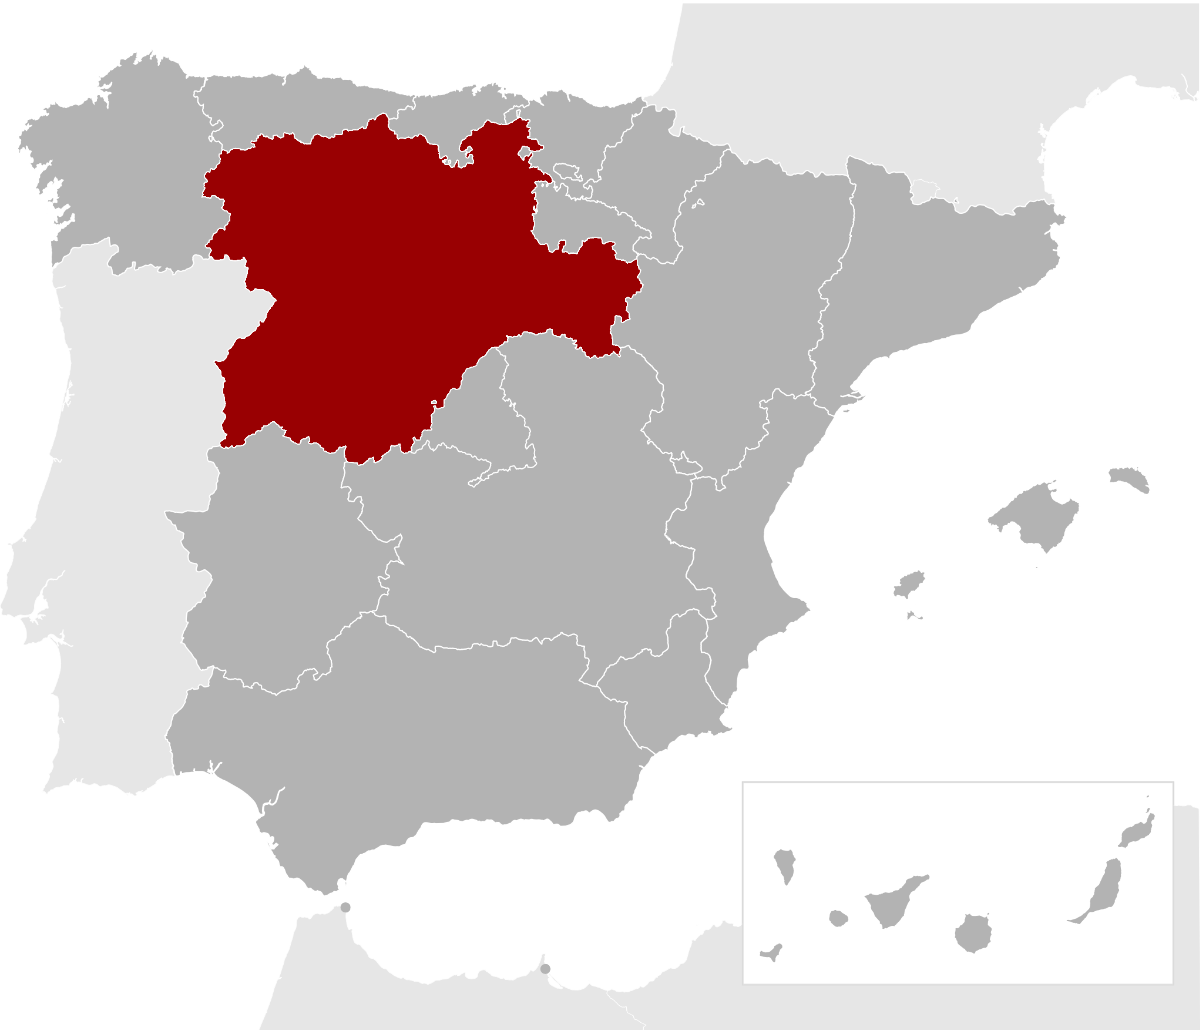 A map of Spain with the Castilla Y Leon region highlighted in red.